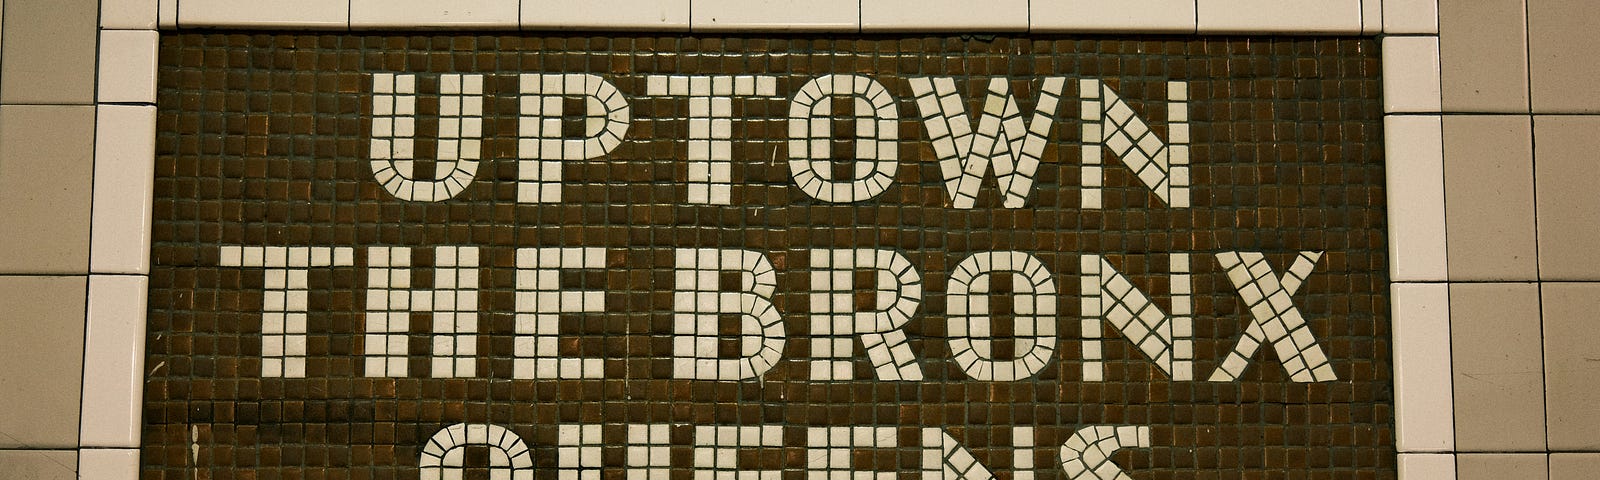 Huge wall subway sign that says Uptown, the Bronx, Queens — with a large arrow to the right.